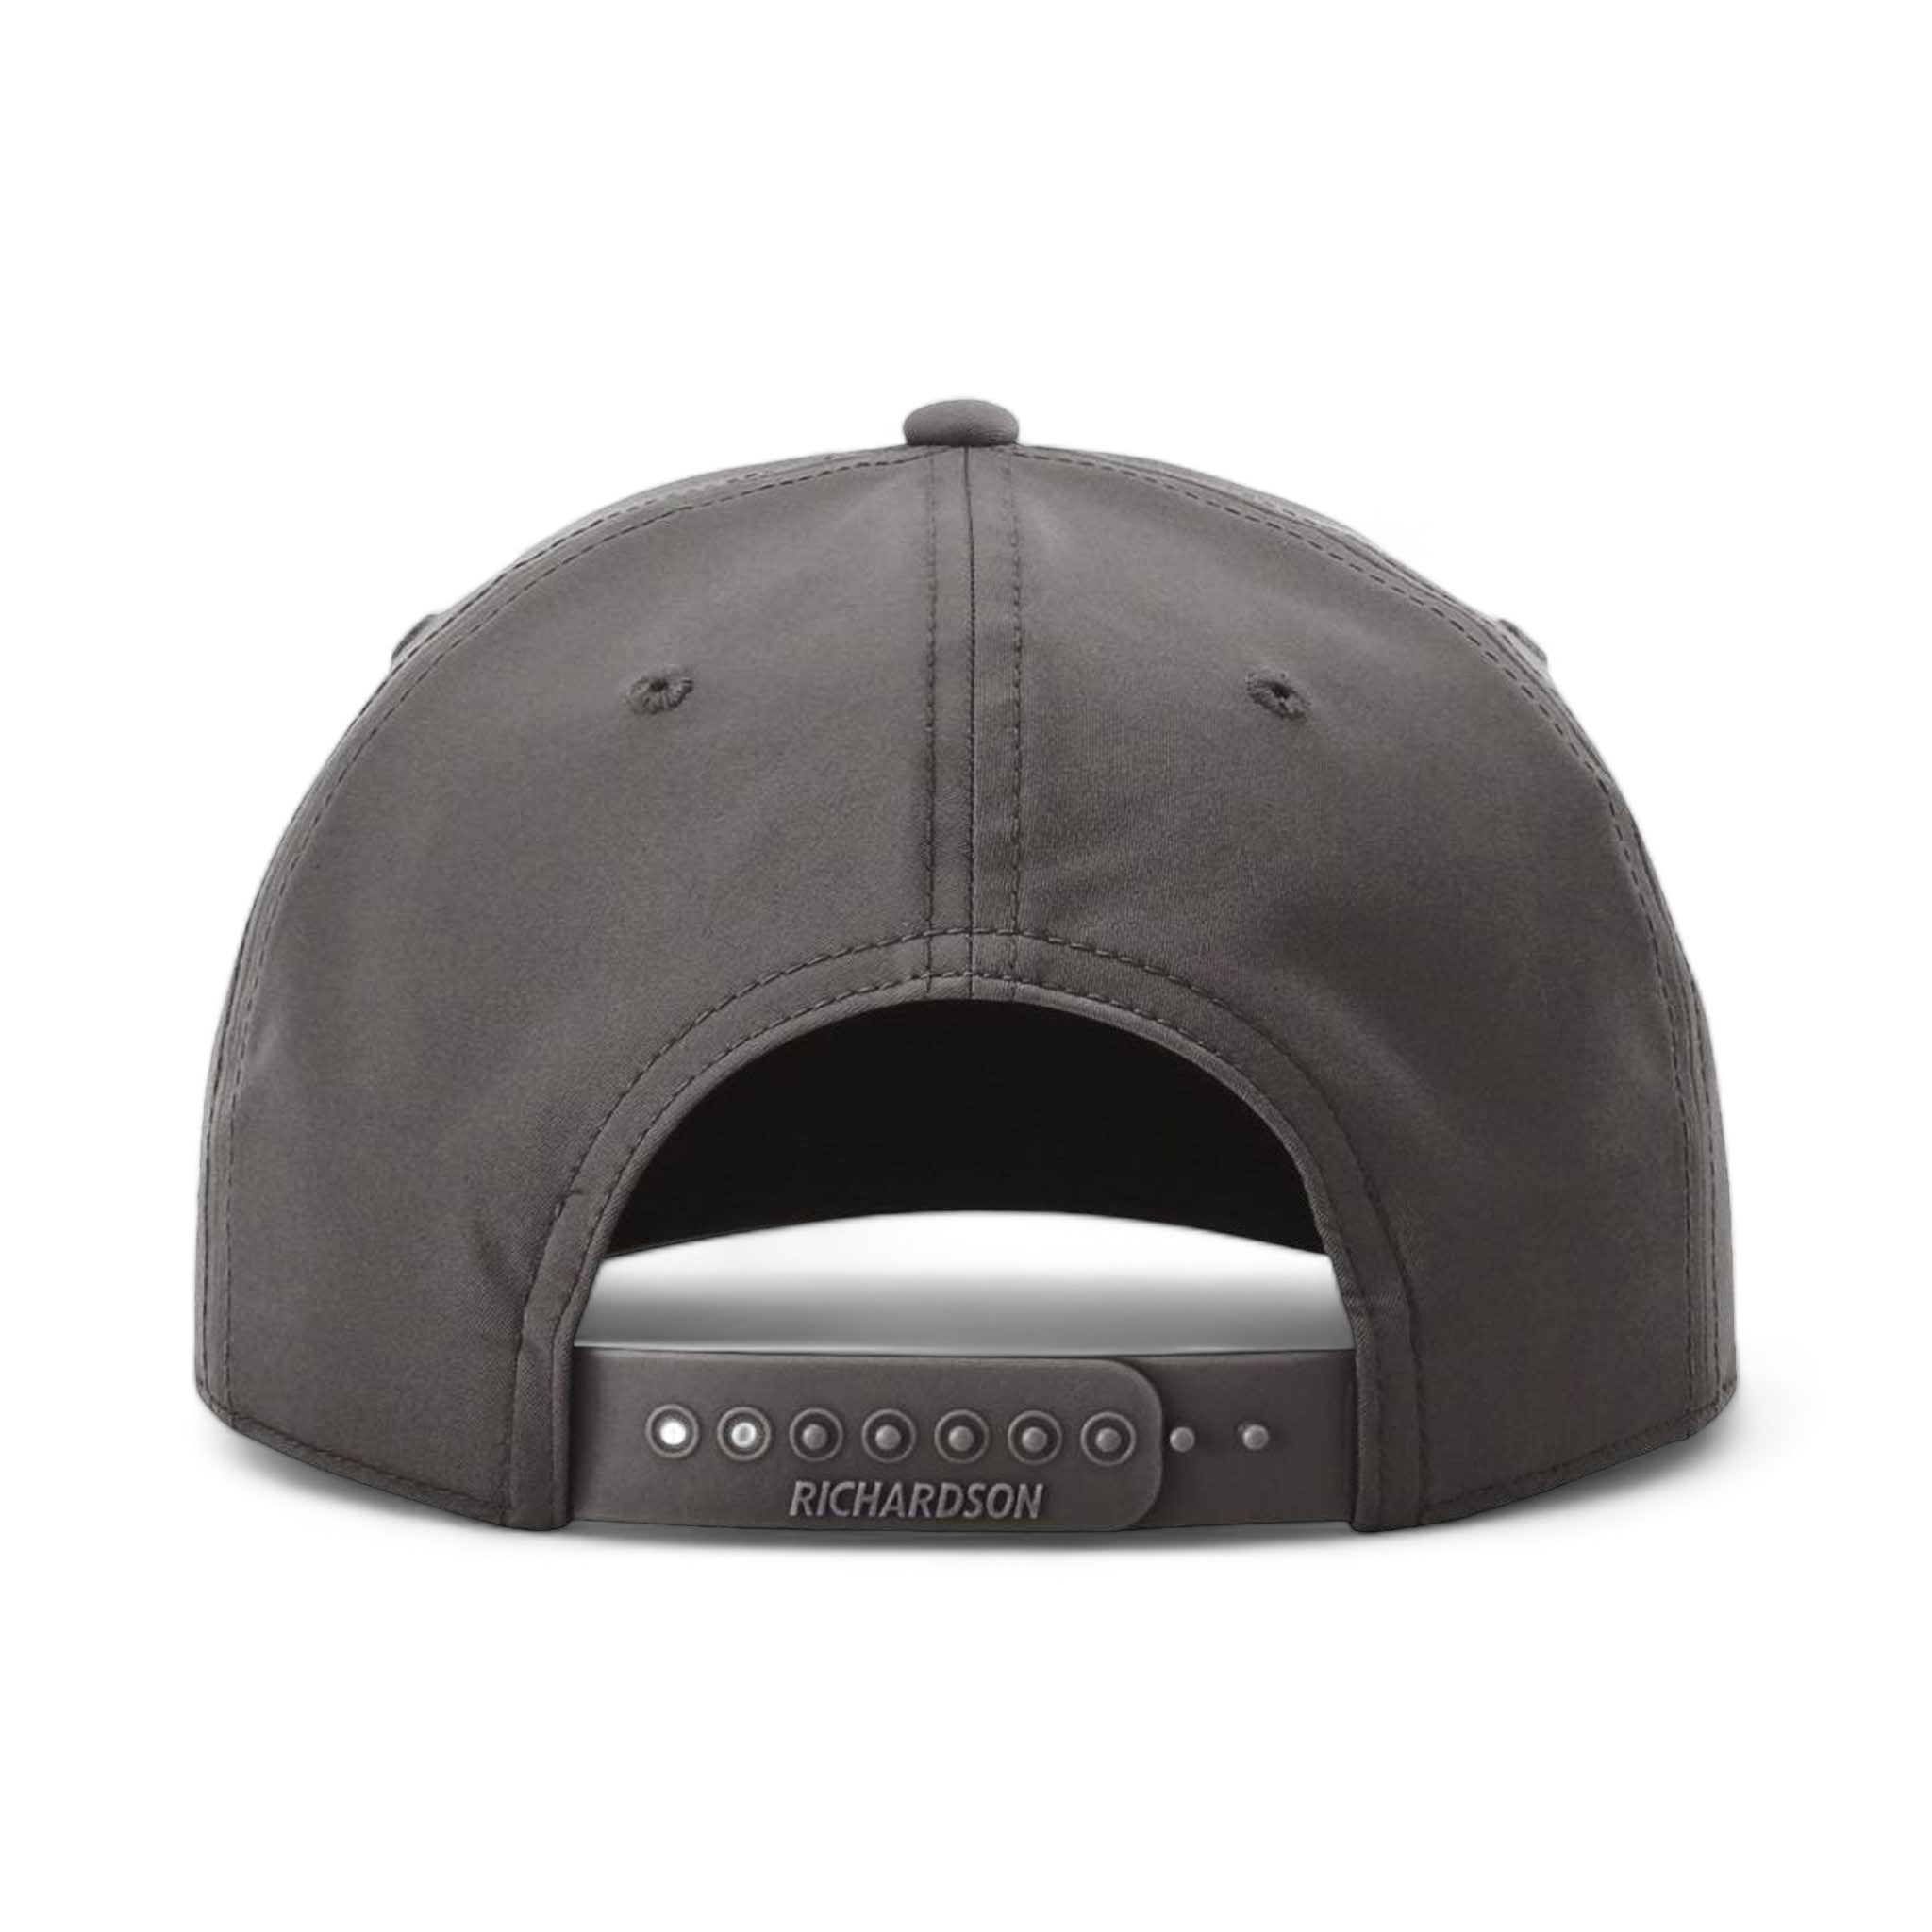 Back view of Richardson 258 custom hat in dark grey and white